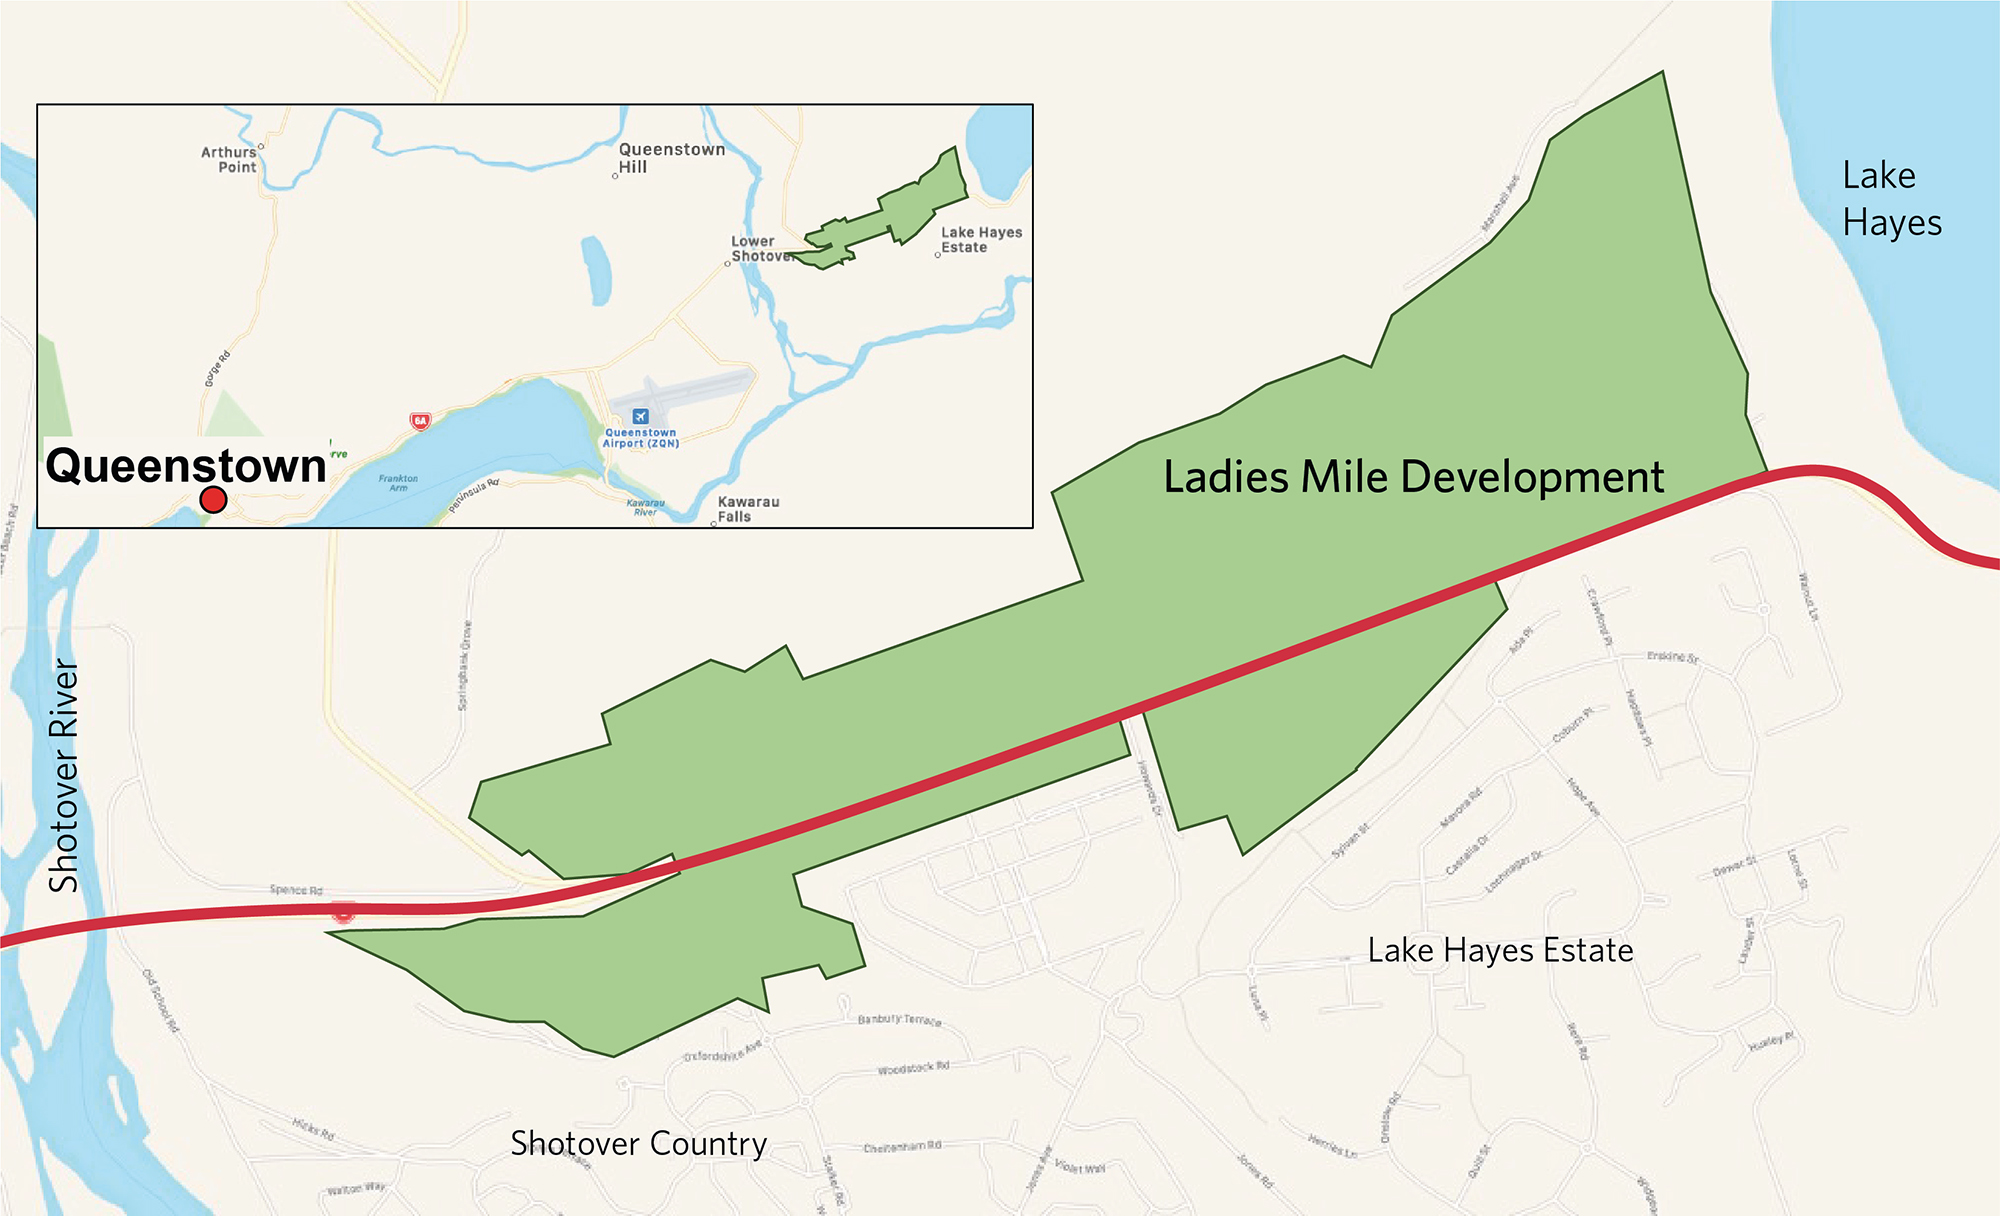 Map of Ladies Mile area shown in green with red line running through.